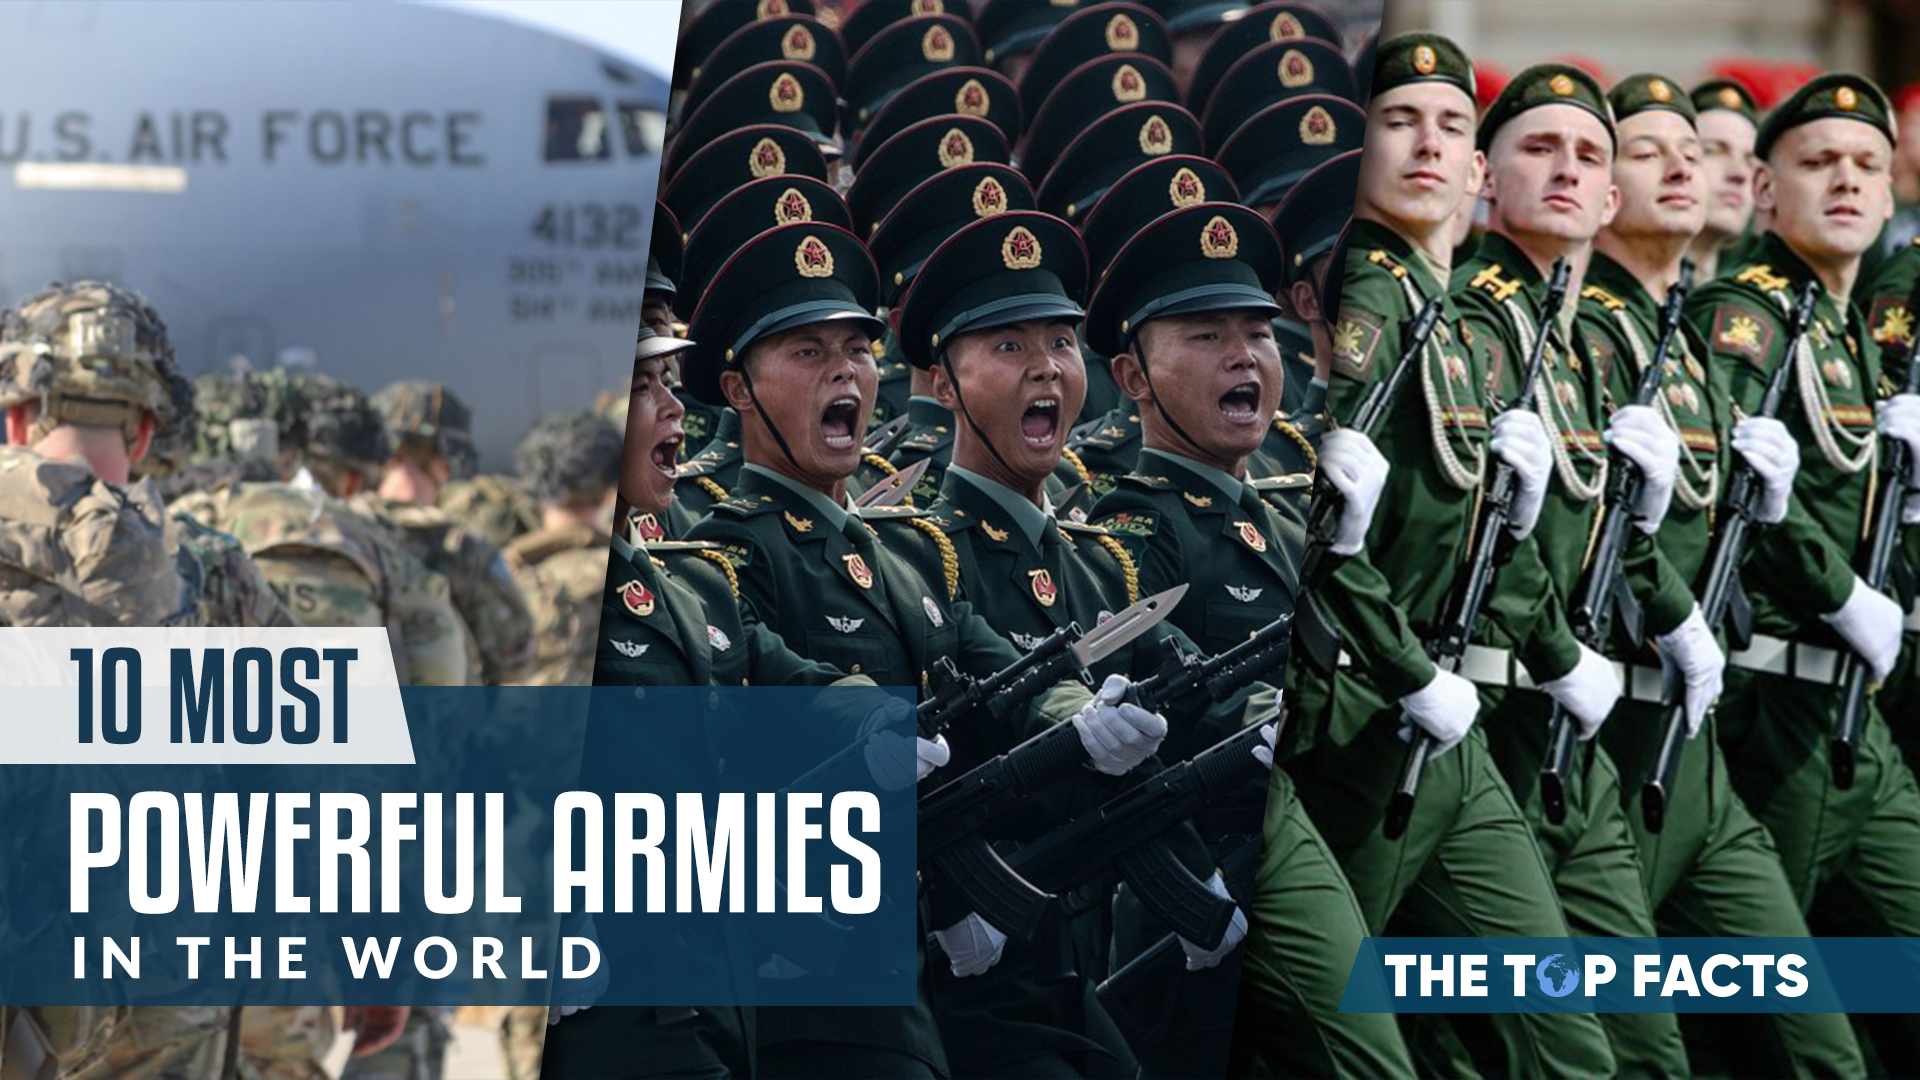 10 Most Powrful Armies in the World